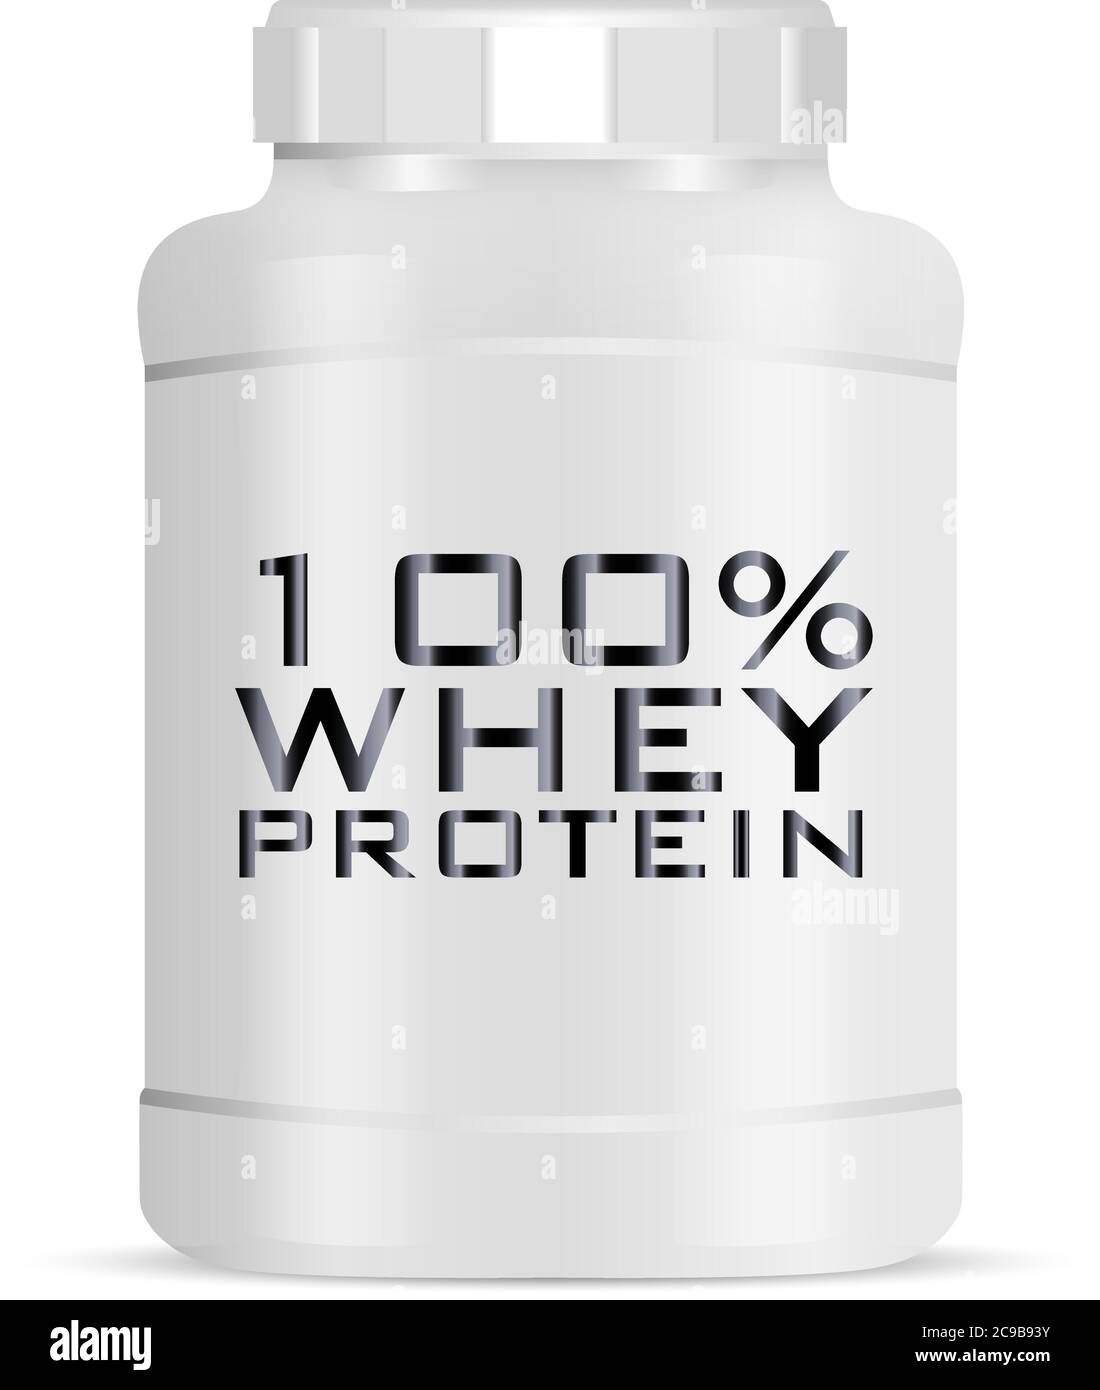 https://c8.alamy.com/comp/2C9B93Y/big-sports-nutrition-can-vector-illustration-protein-bottle-with-white-lid-white-jar-isolated-on-background-2C9B93Y.jpg